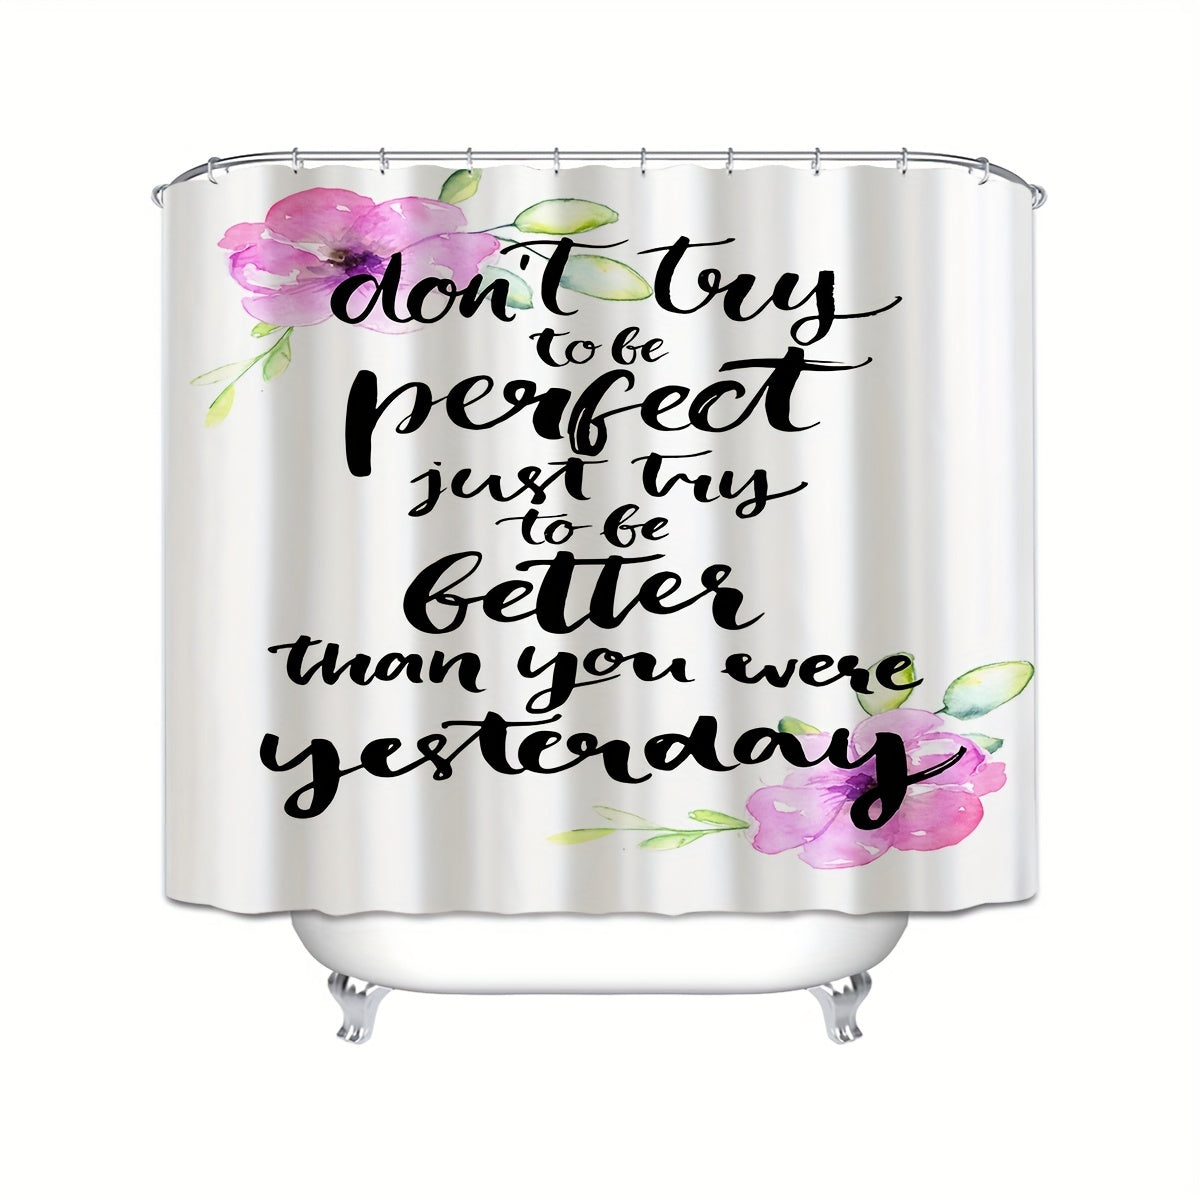 Be Better Than  You Were Yesterday Christian Shower Curtain claimedbygoddesigns